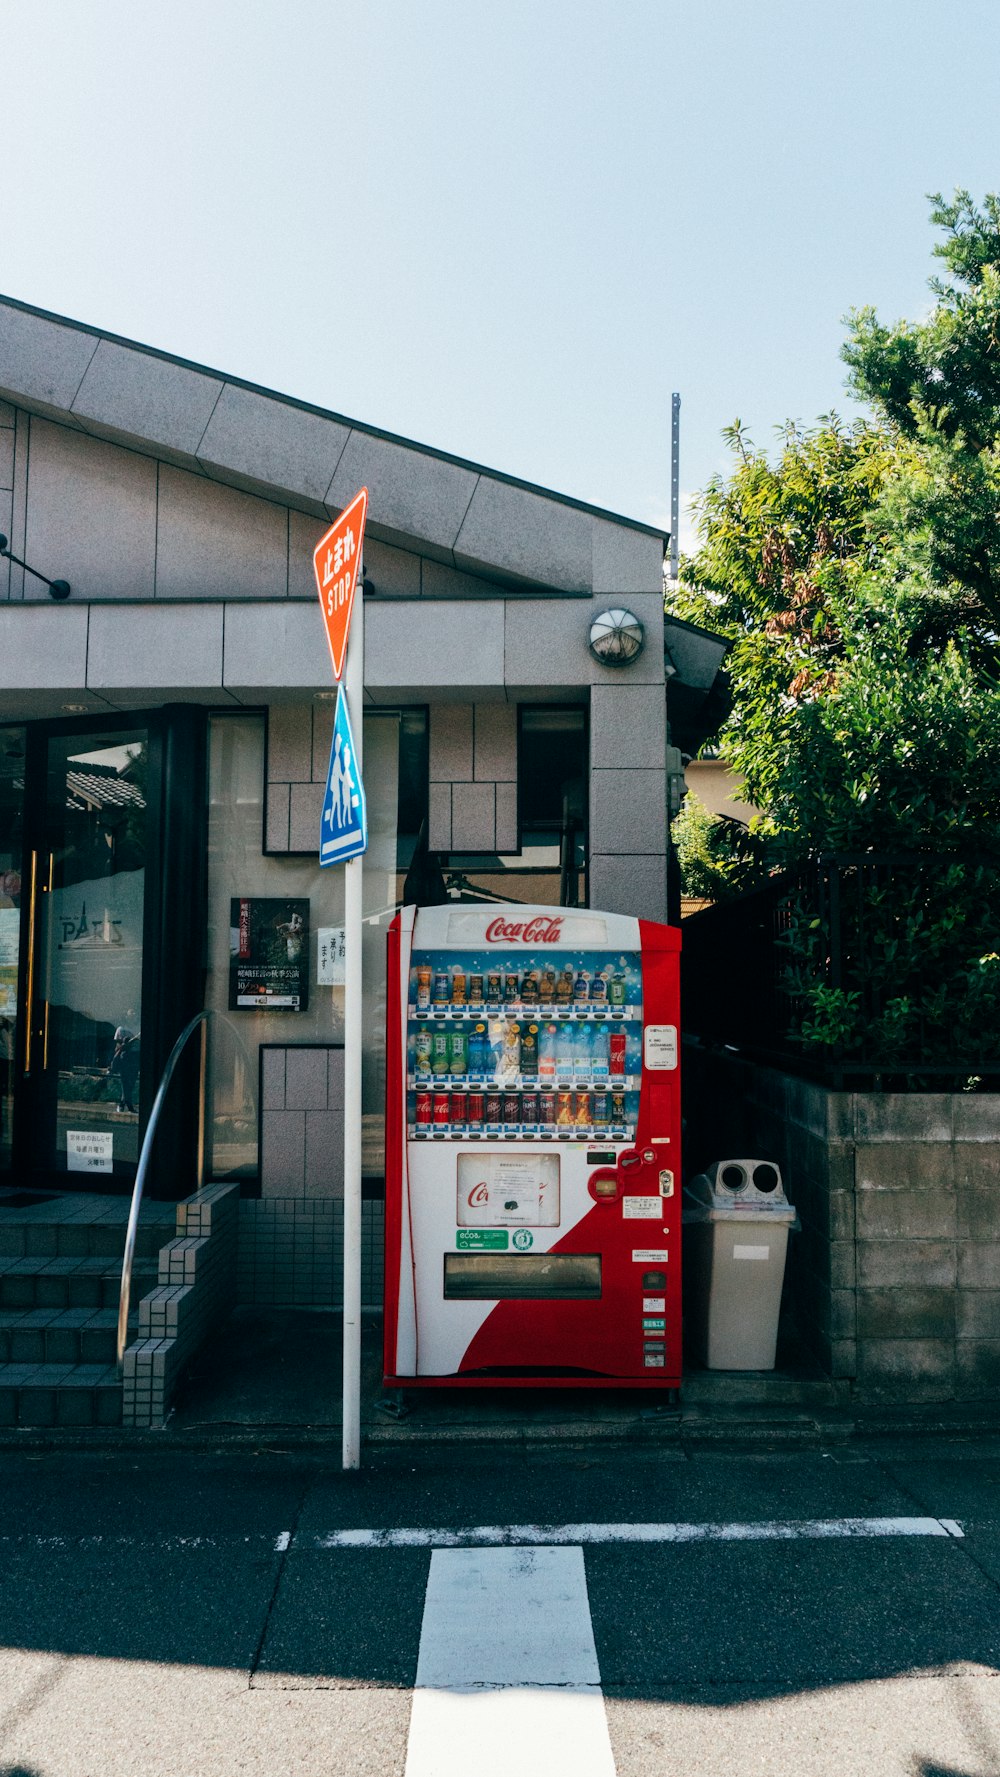 a vending machine sitting on the side of a road